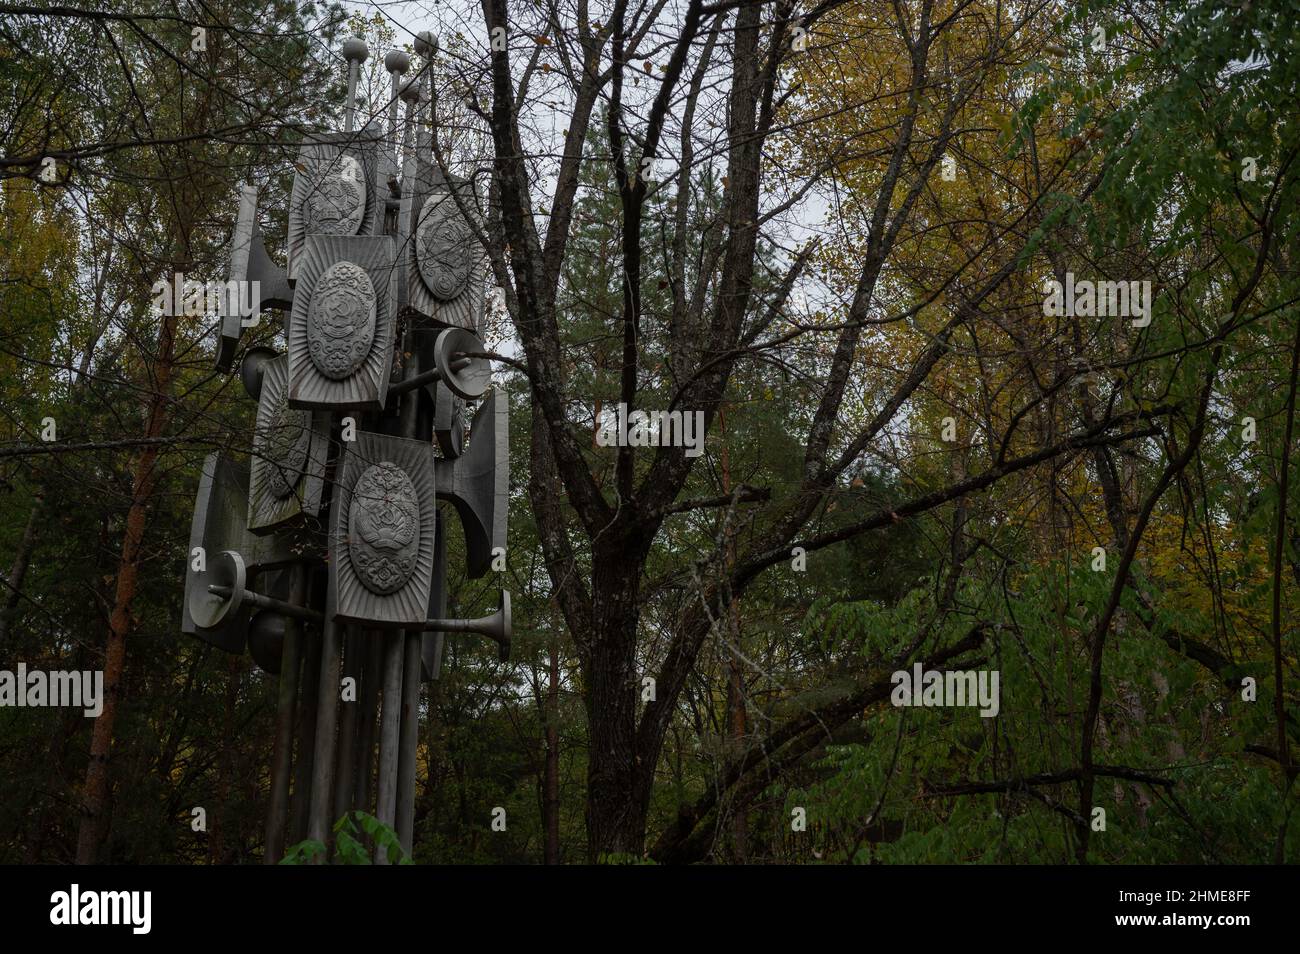 The Friendship of Nations monument in Pripyat, Ukraine, near the Chernobyl Nuclear Power Plant, shows the insignia of all the Soviet nations. Stock Photo